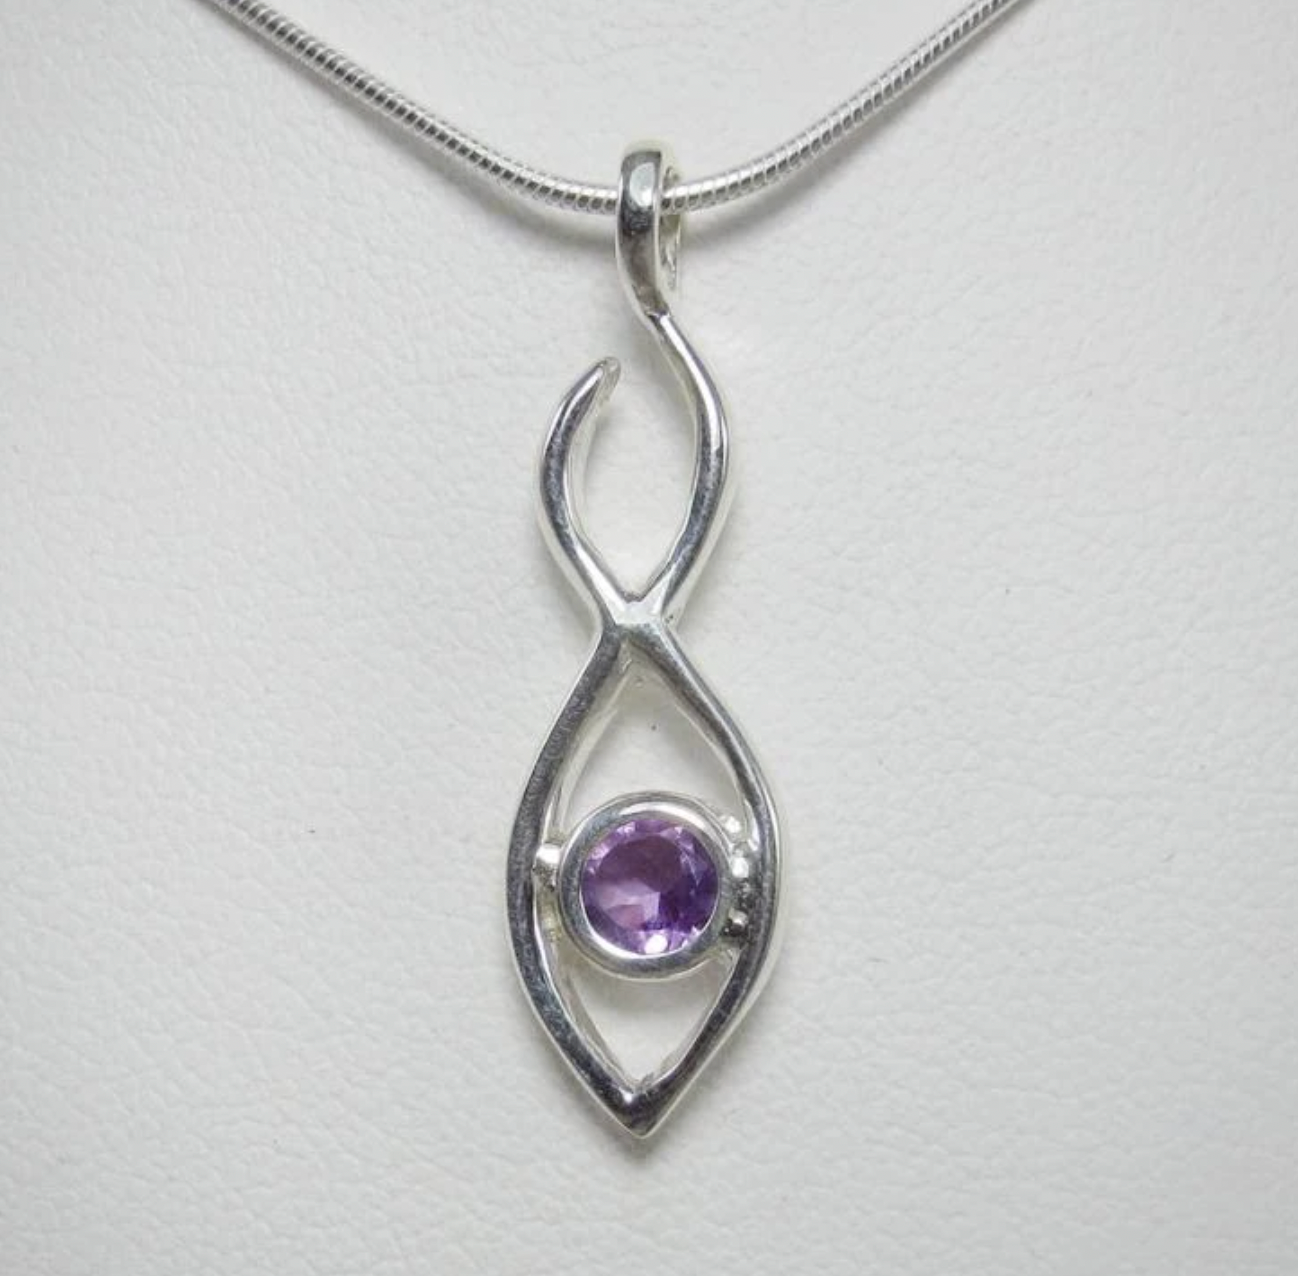 Twin Flame Pendant (Various Colors)